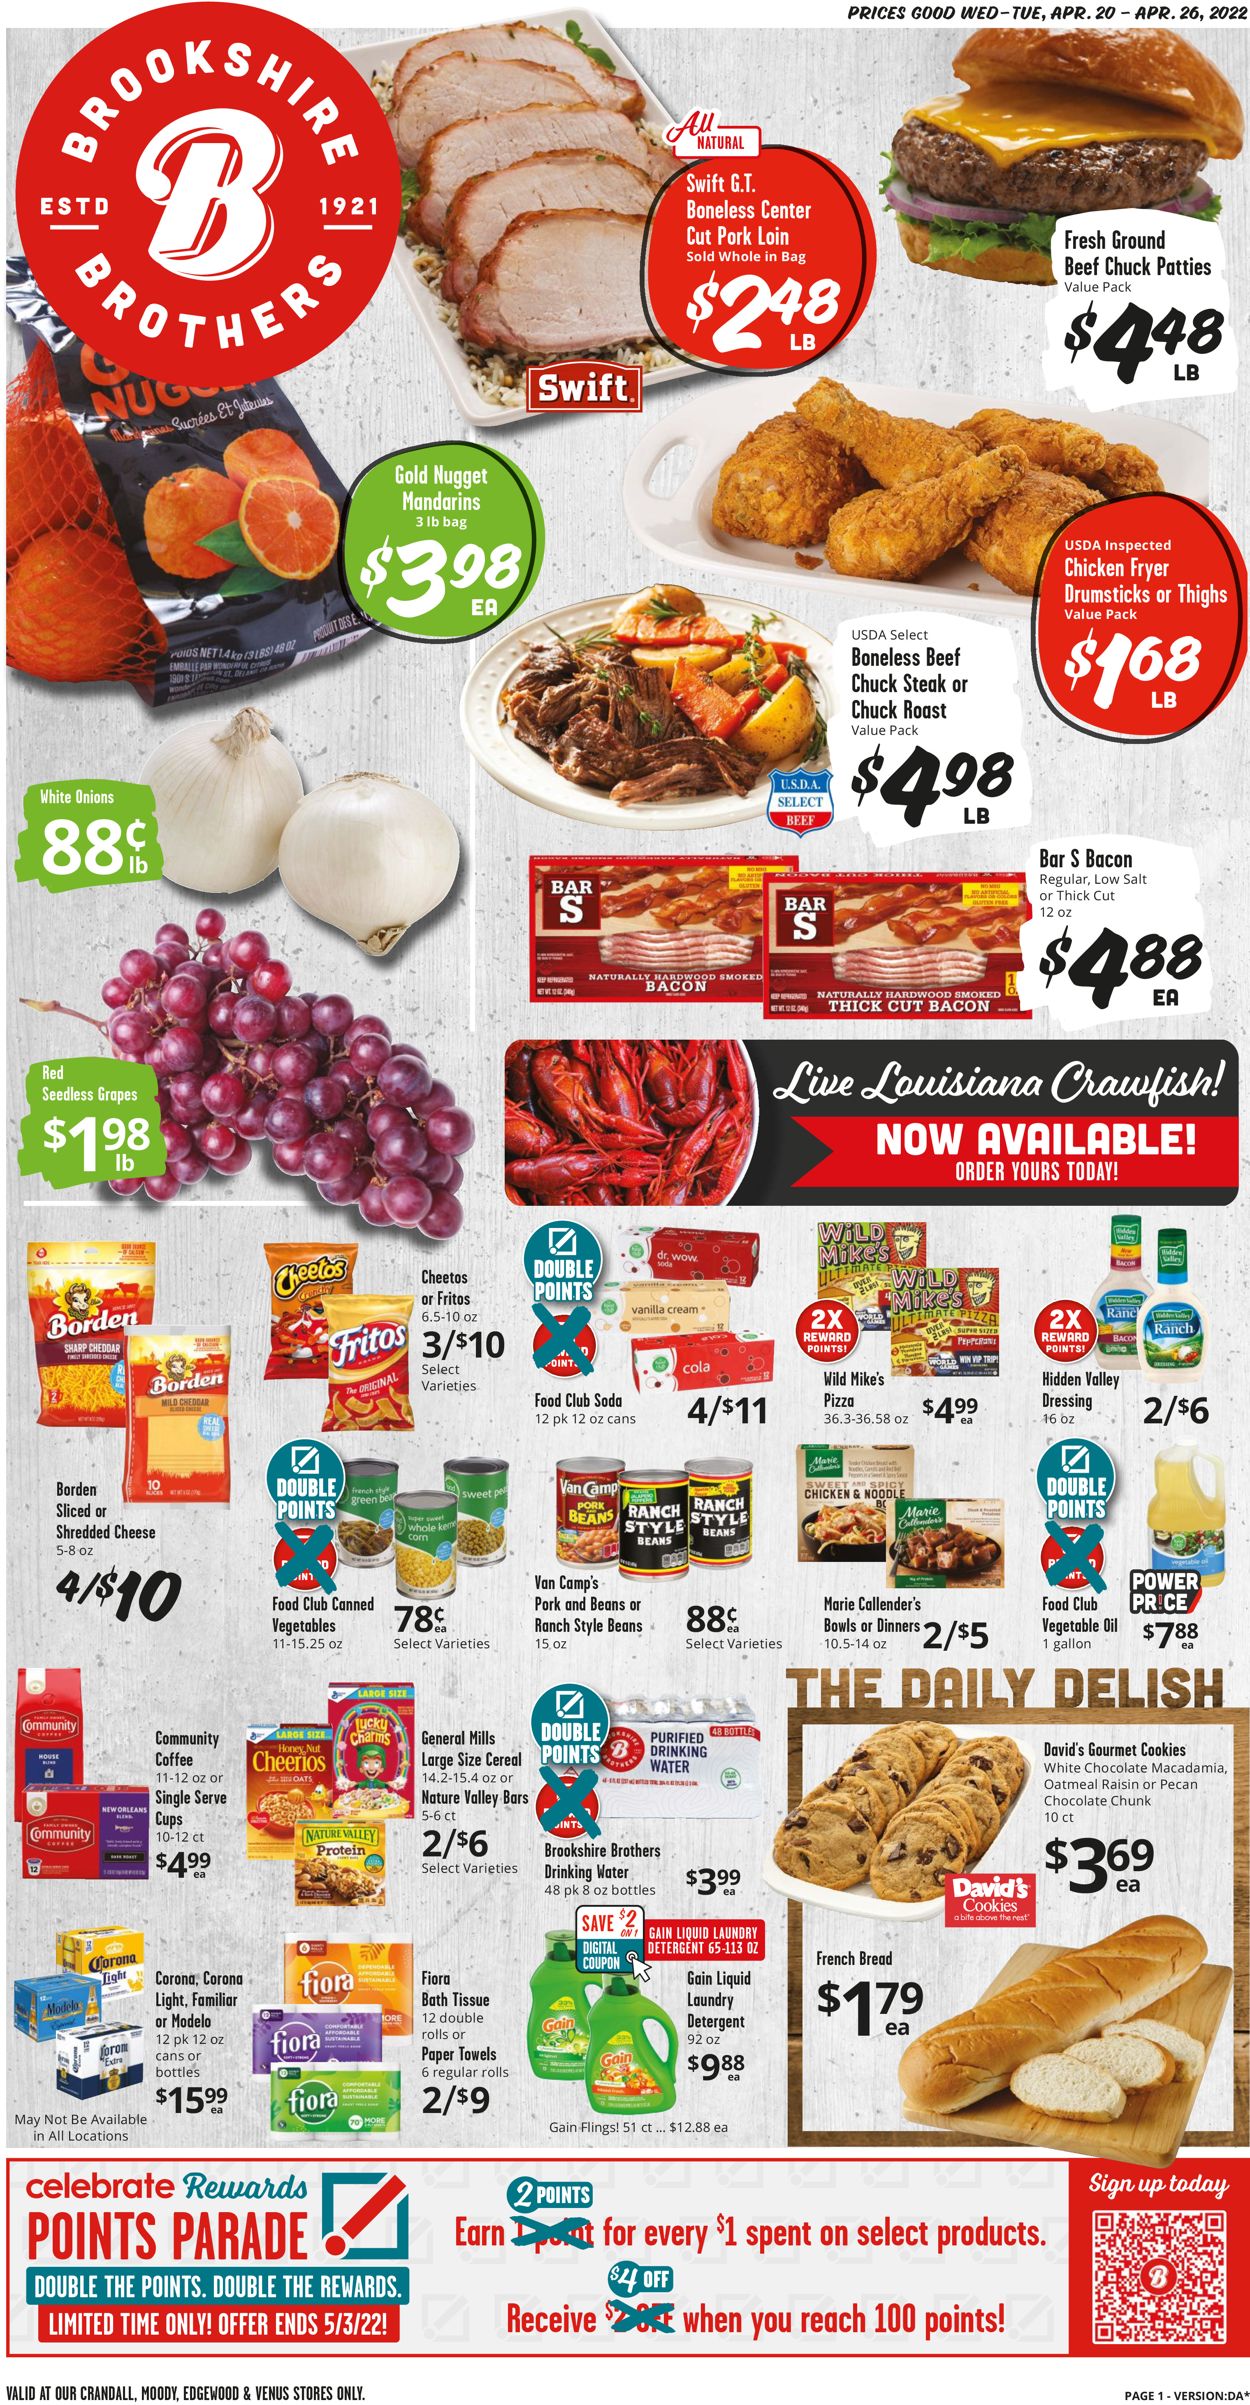 Brookshire Brothers Current weekly ad 04/20 - 04/26/2022 - frequent-ads.com